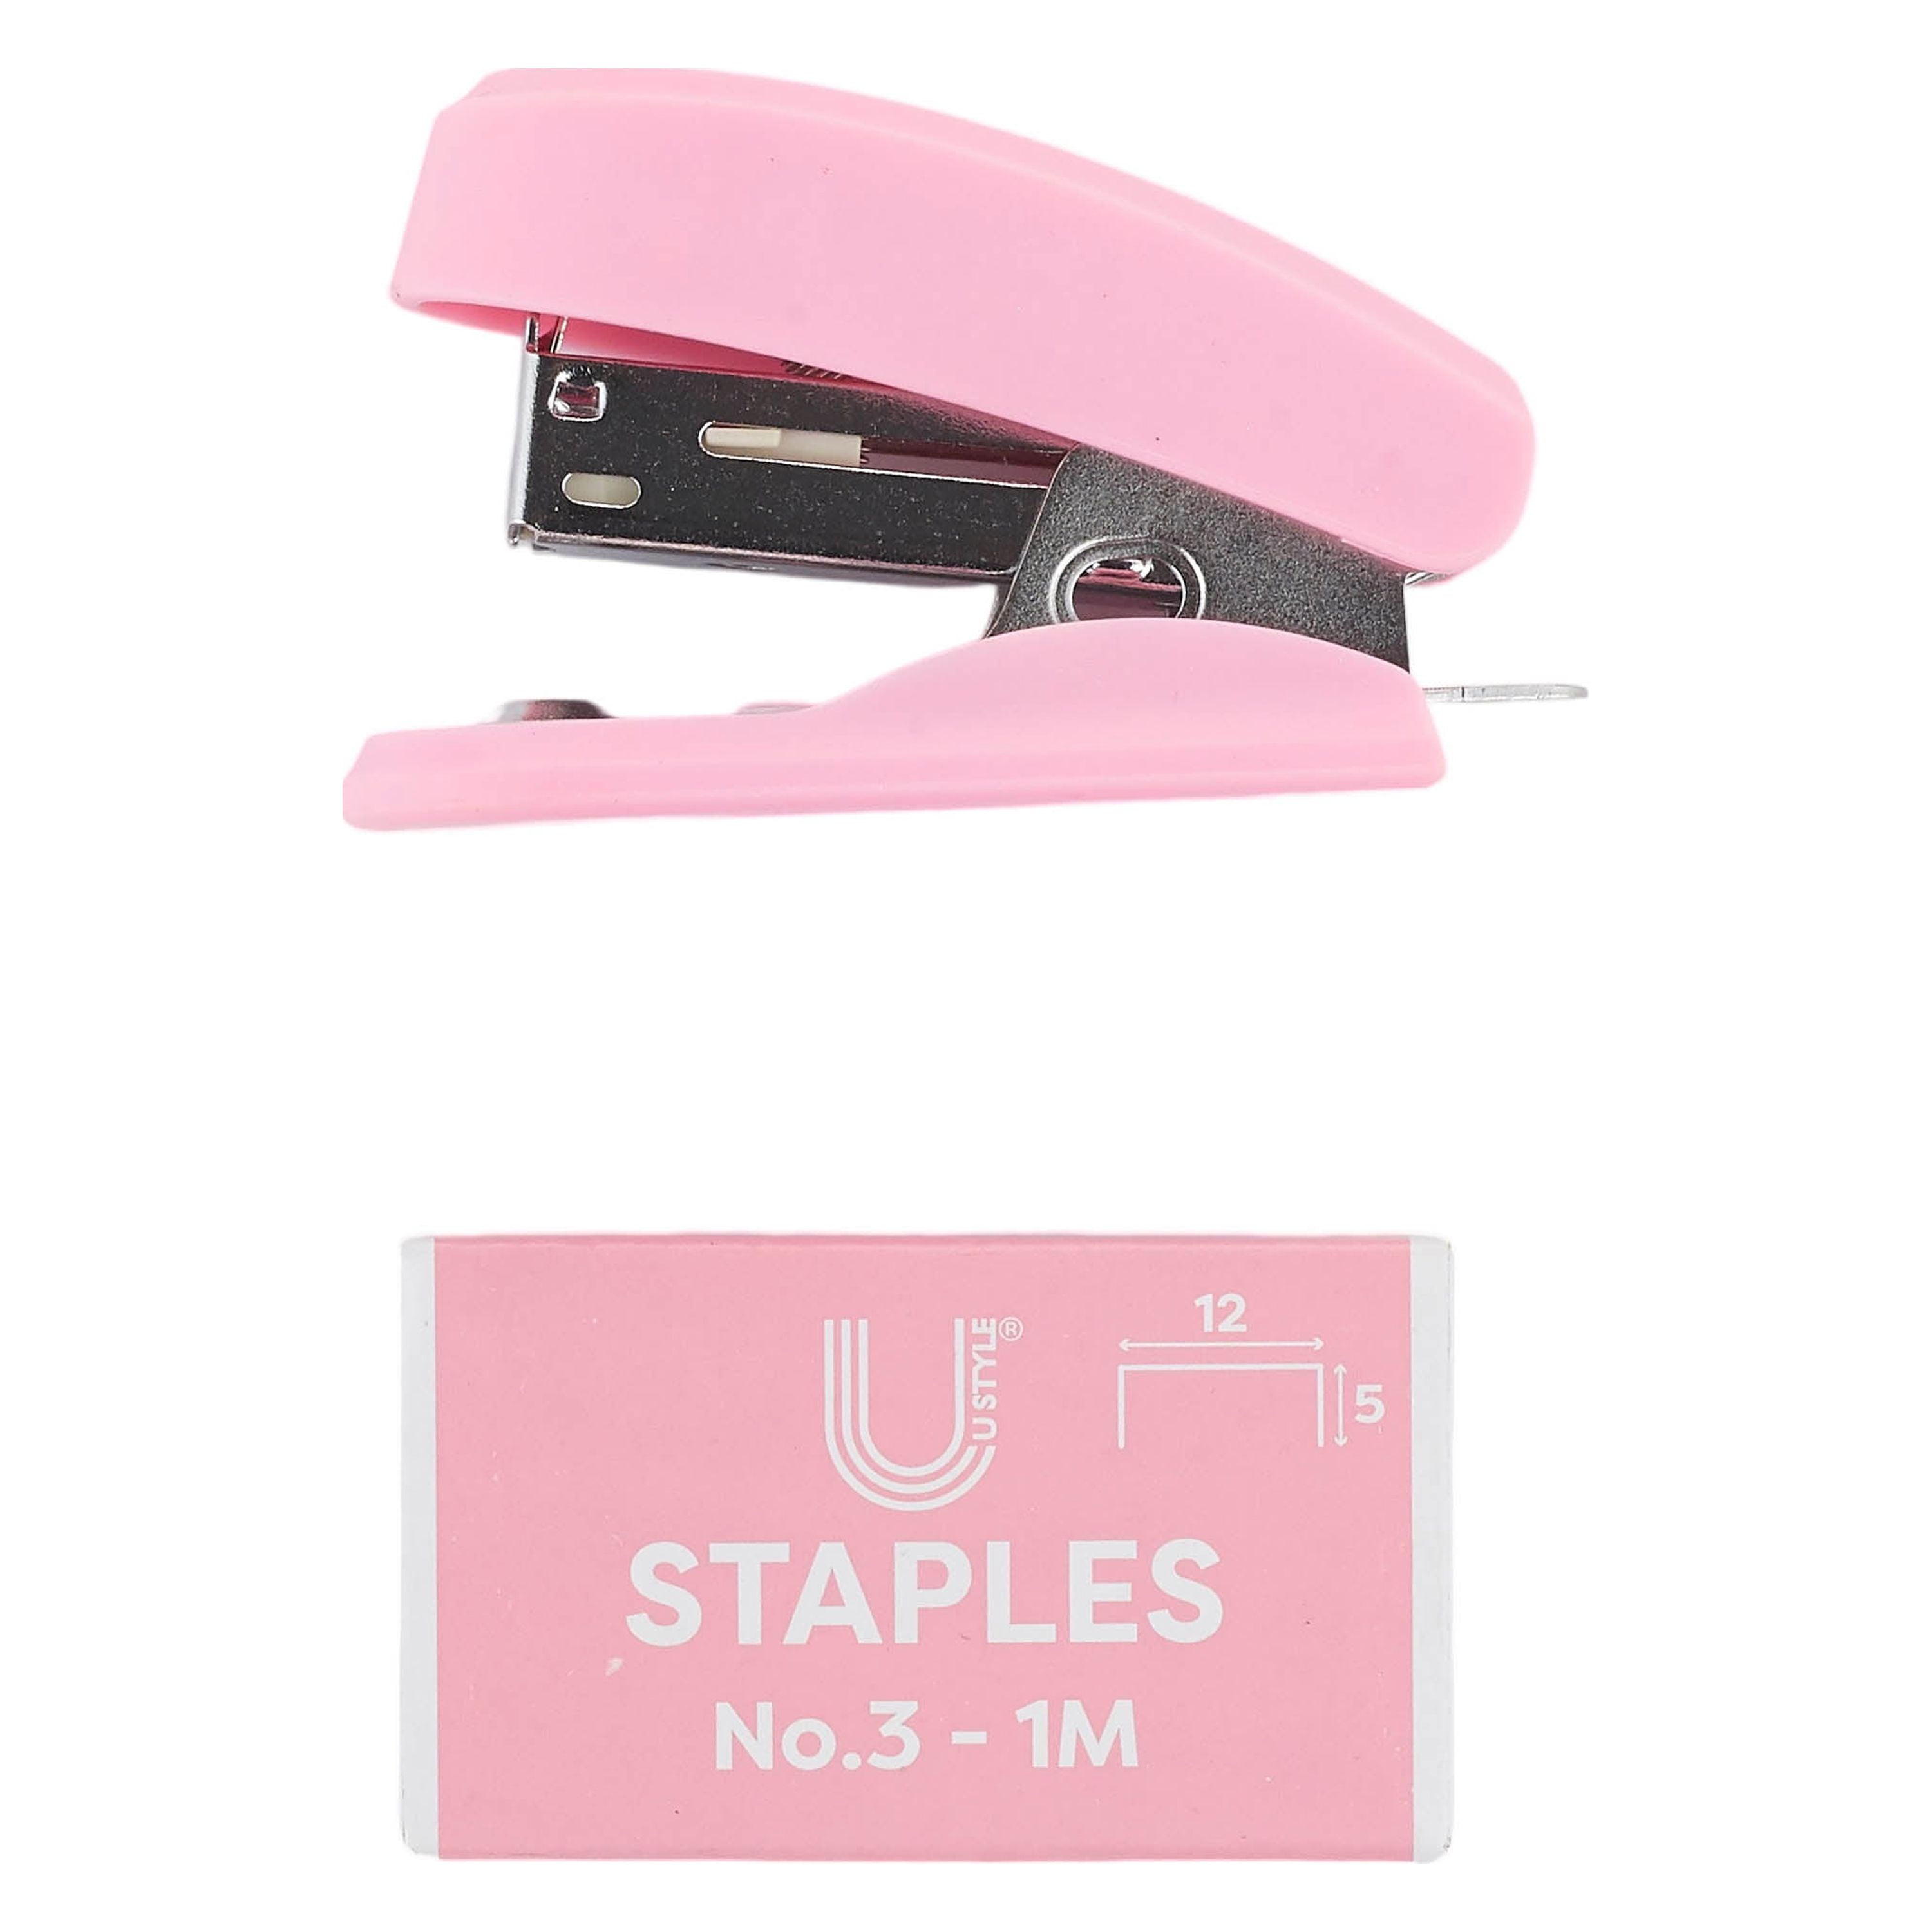 How to Choose the Right Stapler